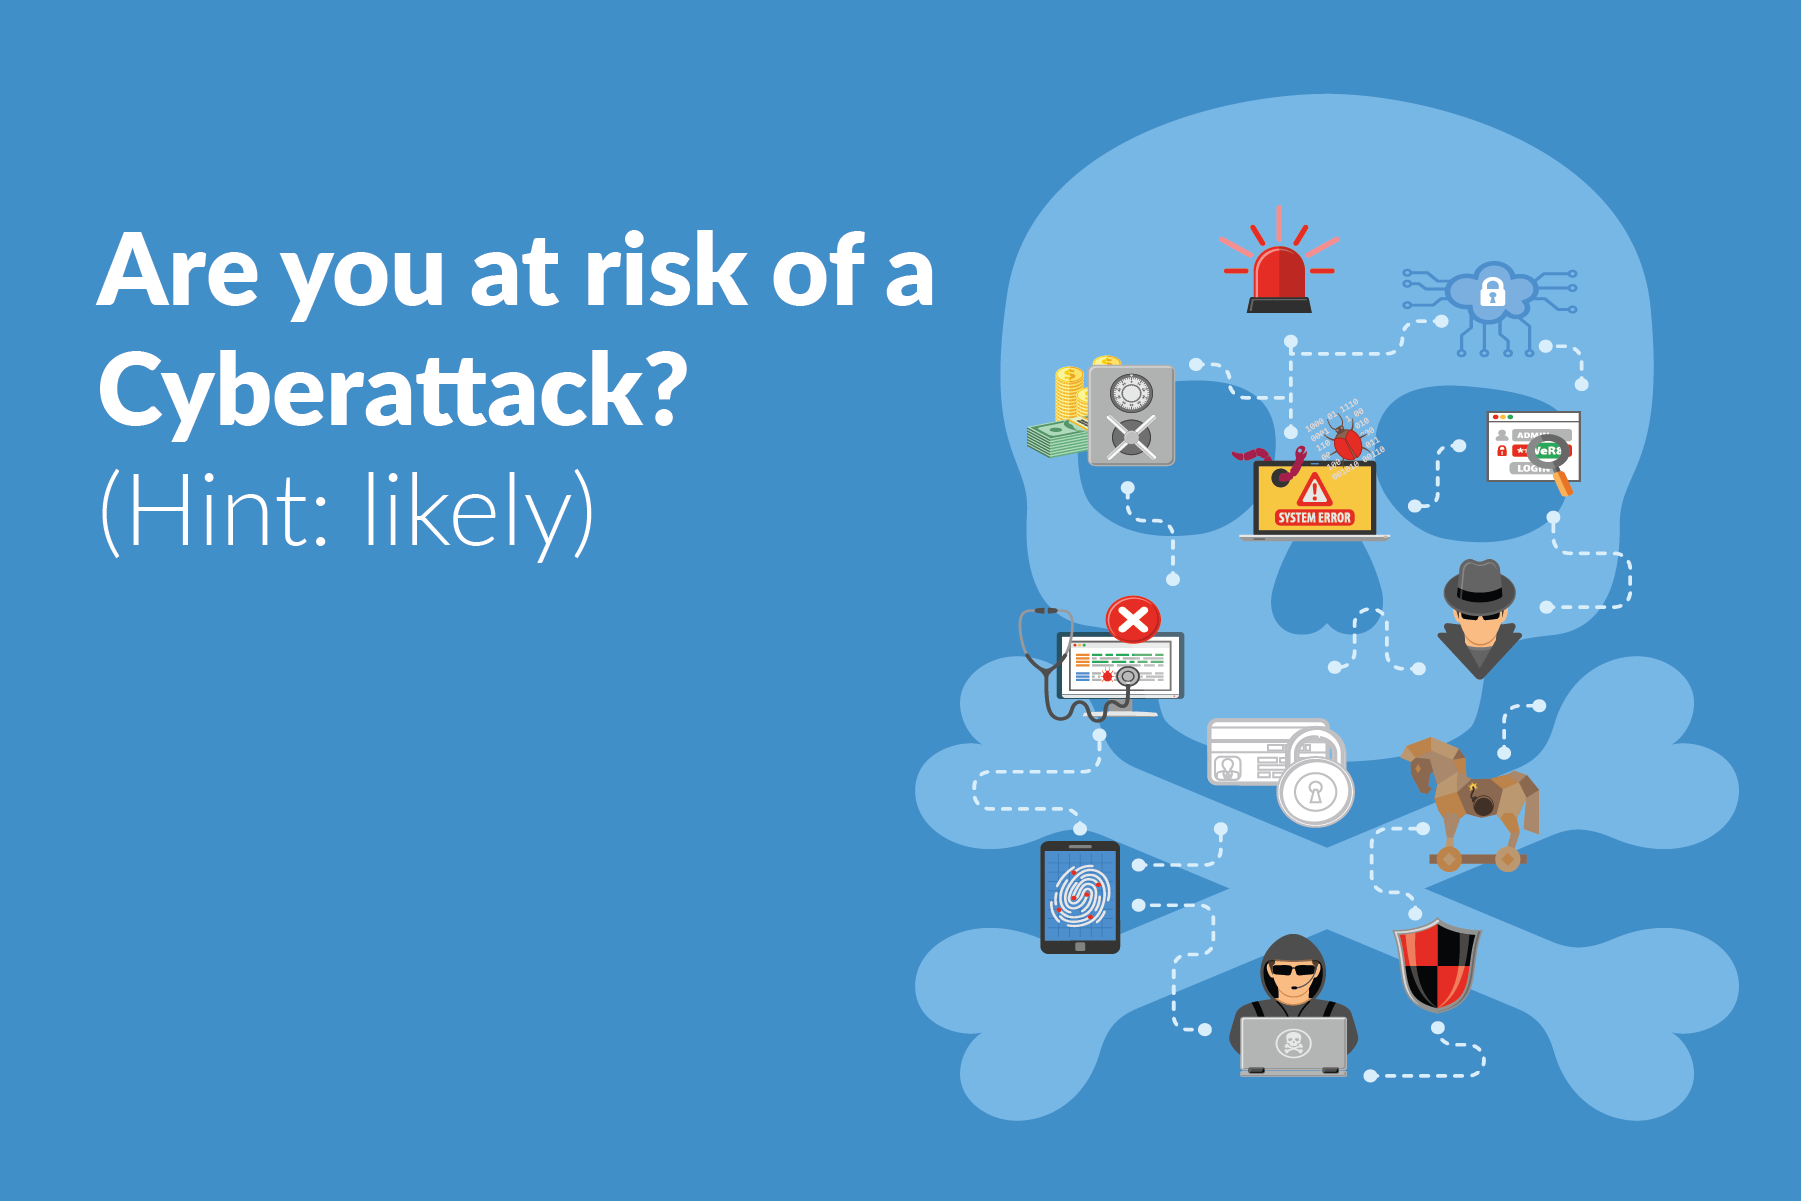 Are you at risk of a cyberattack? (Hint: likely.)